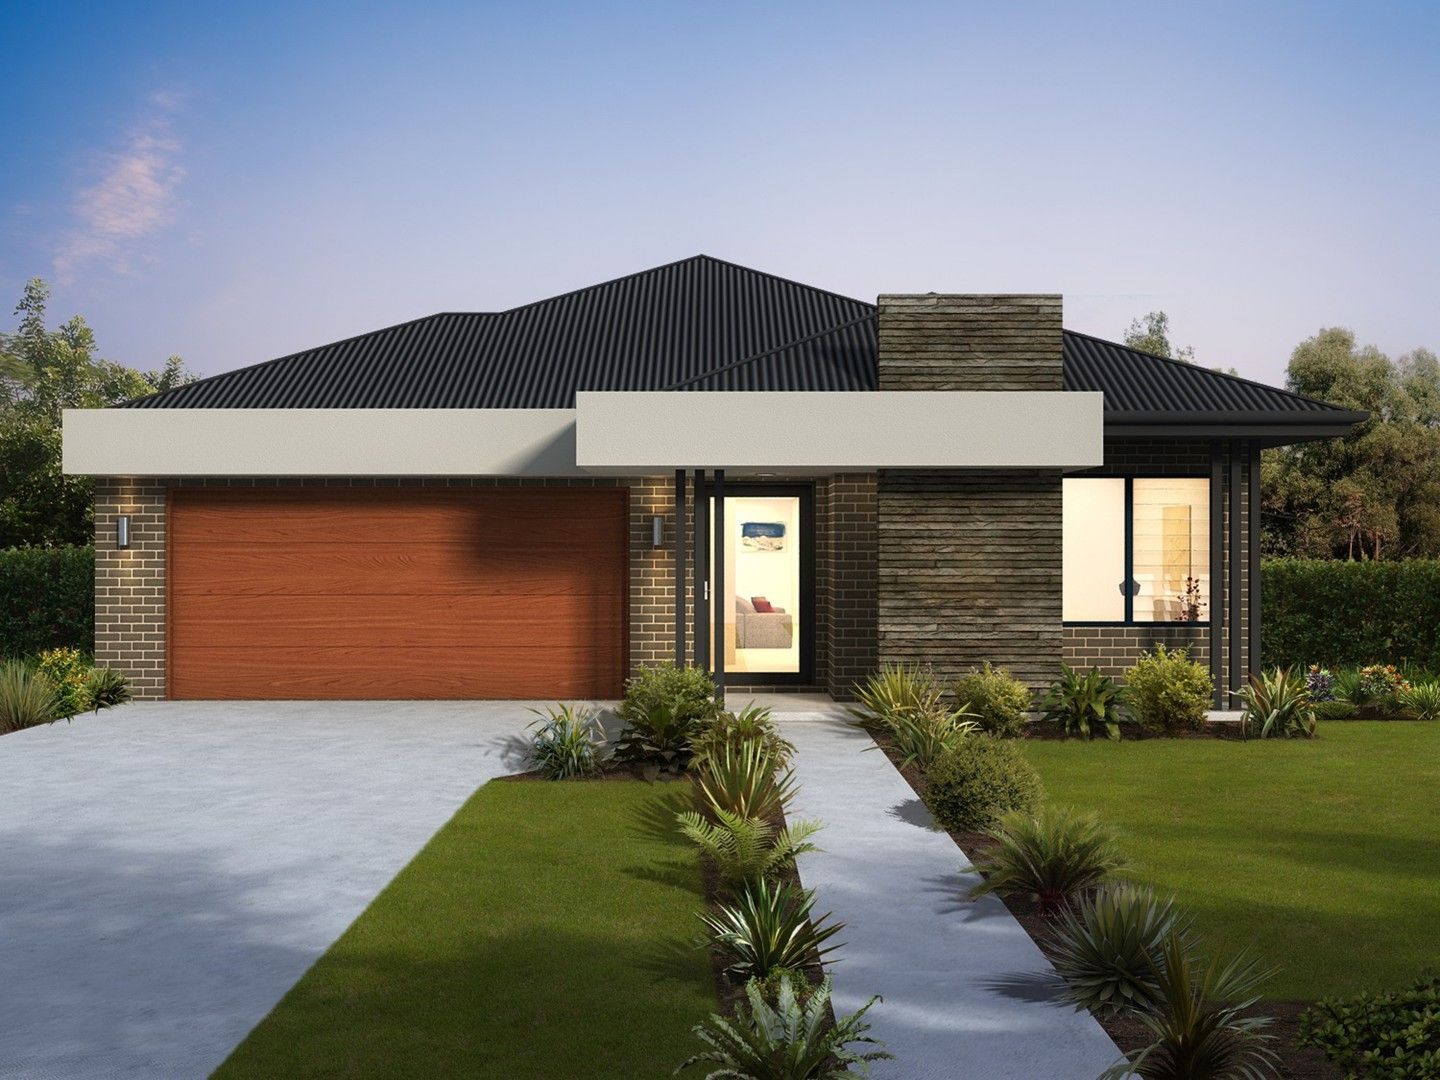 4 bedrooms New House & Land in Lot 309 Albion Road MAITLAND NSW, 2320